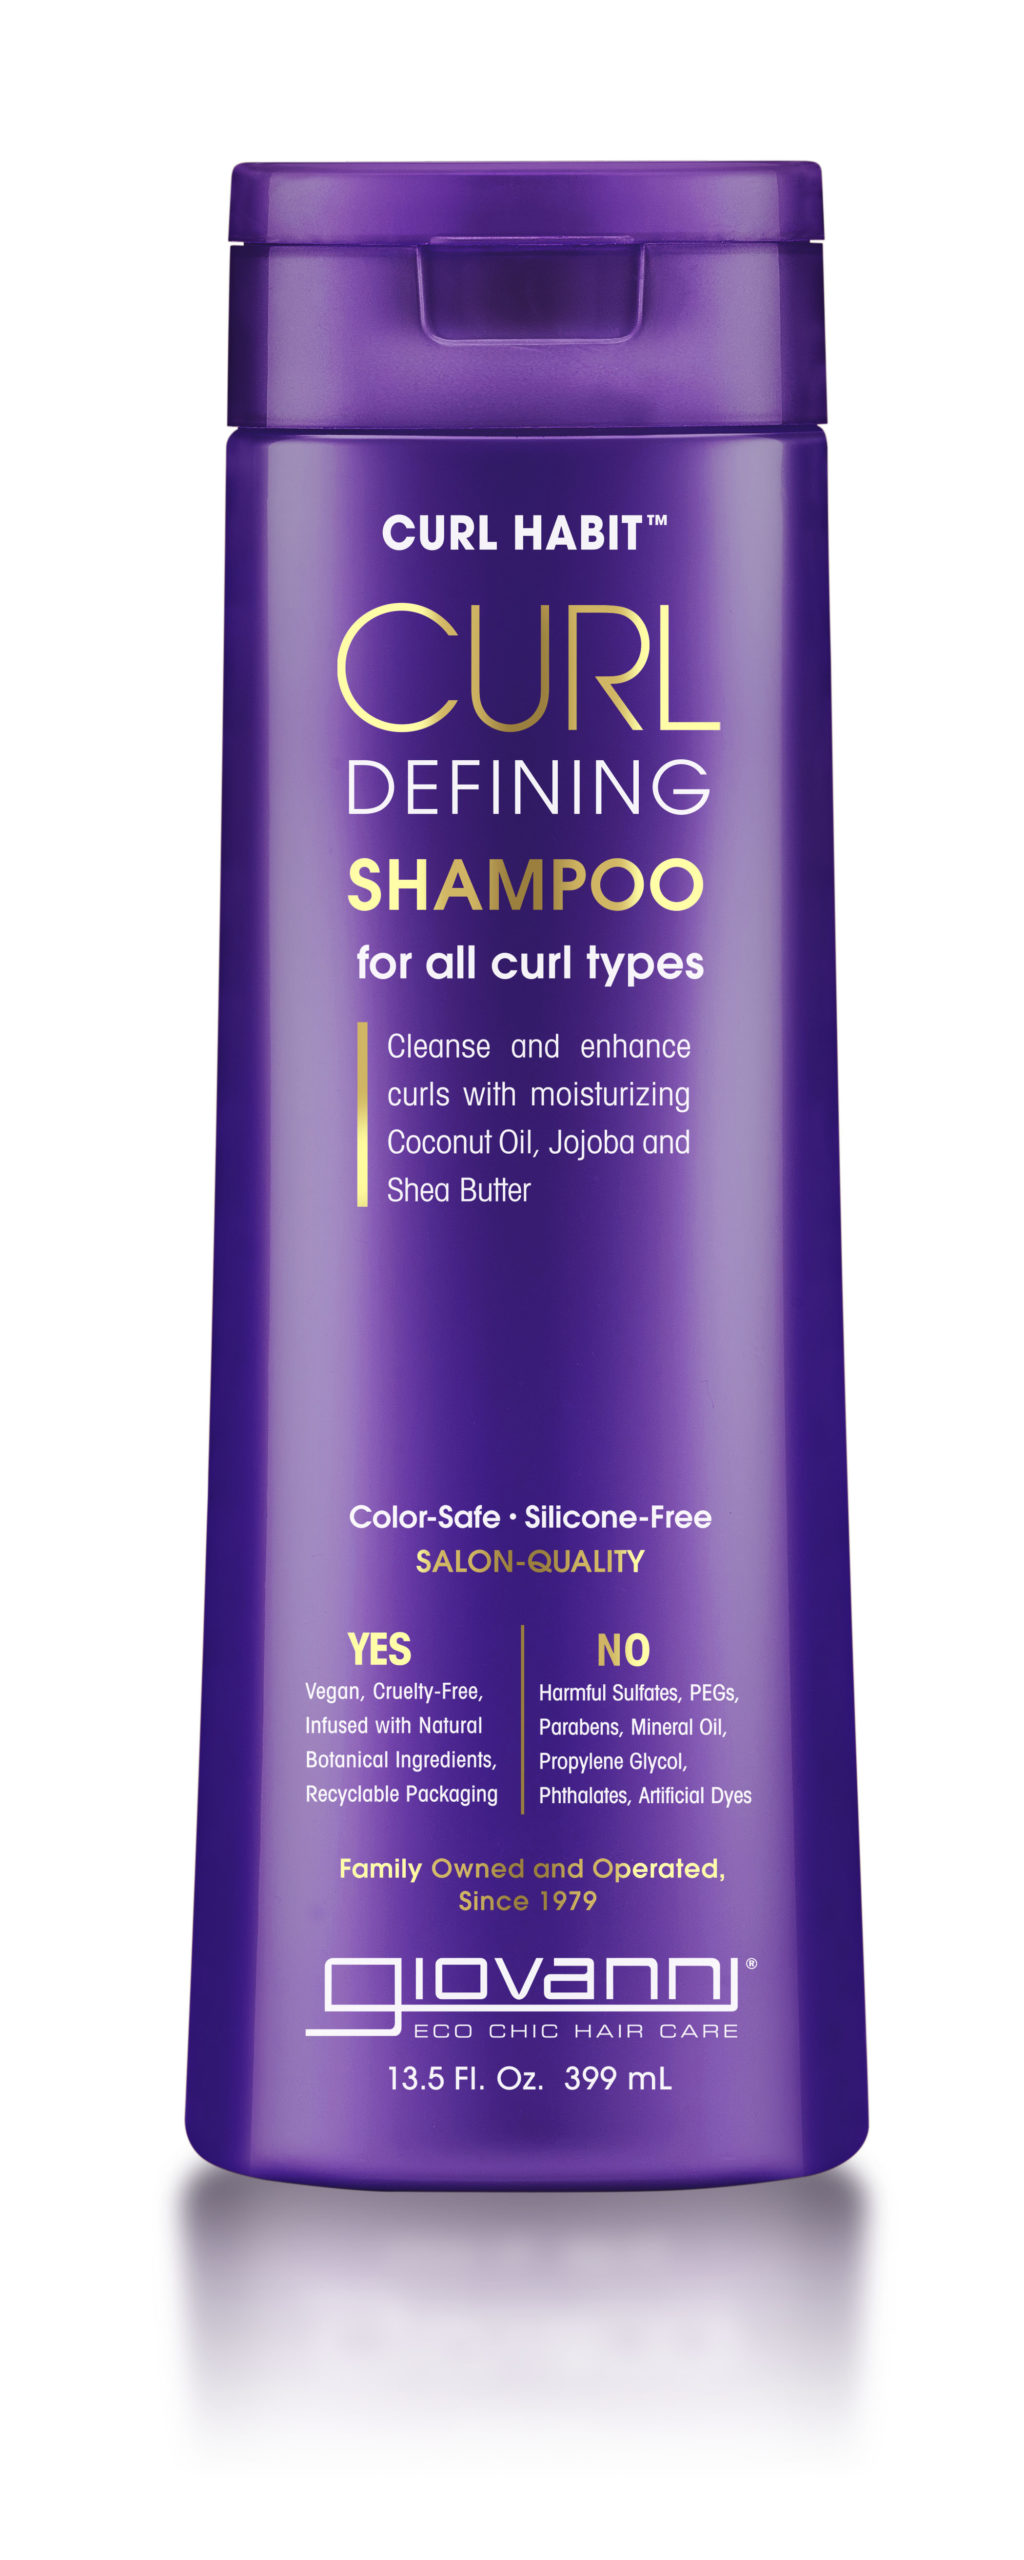 HABIT Curl Defining Shampoo | hydrate and protect with